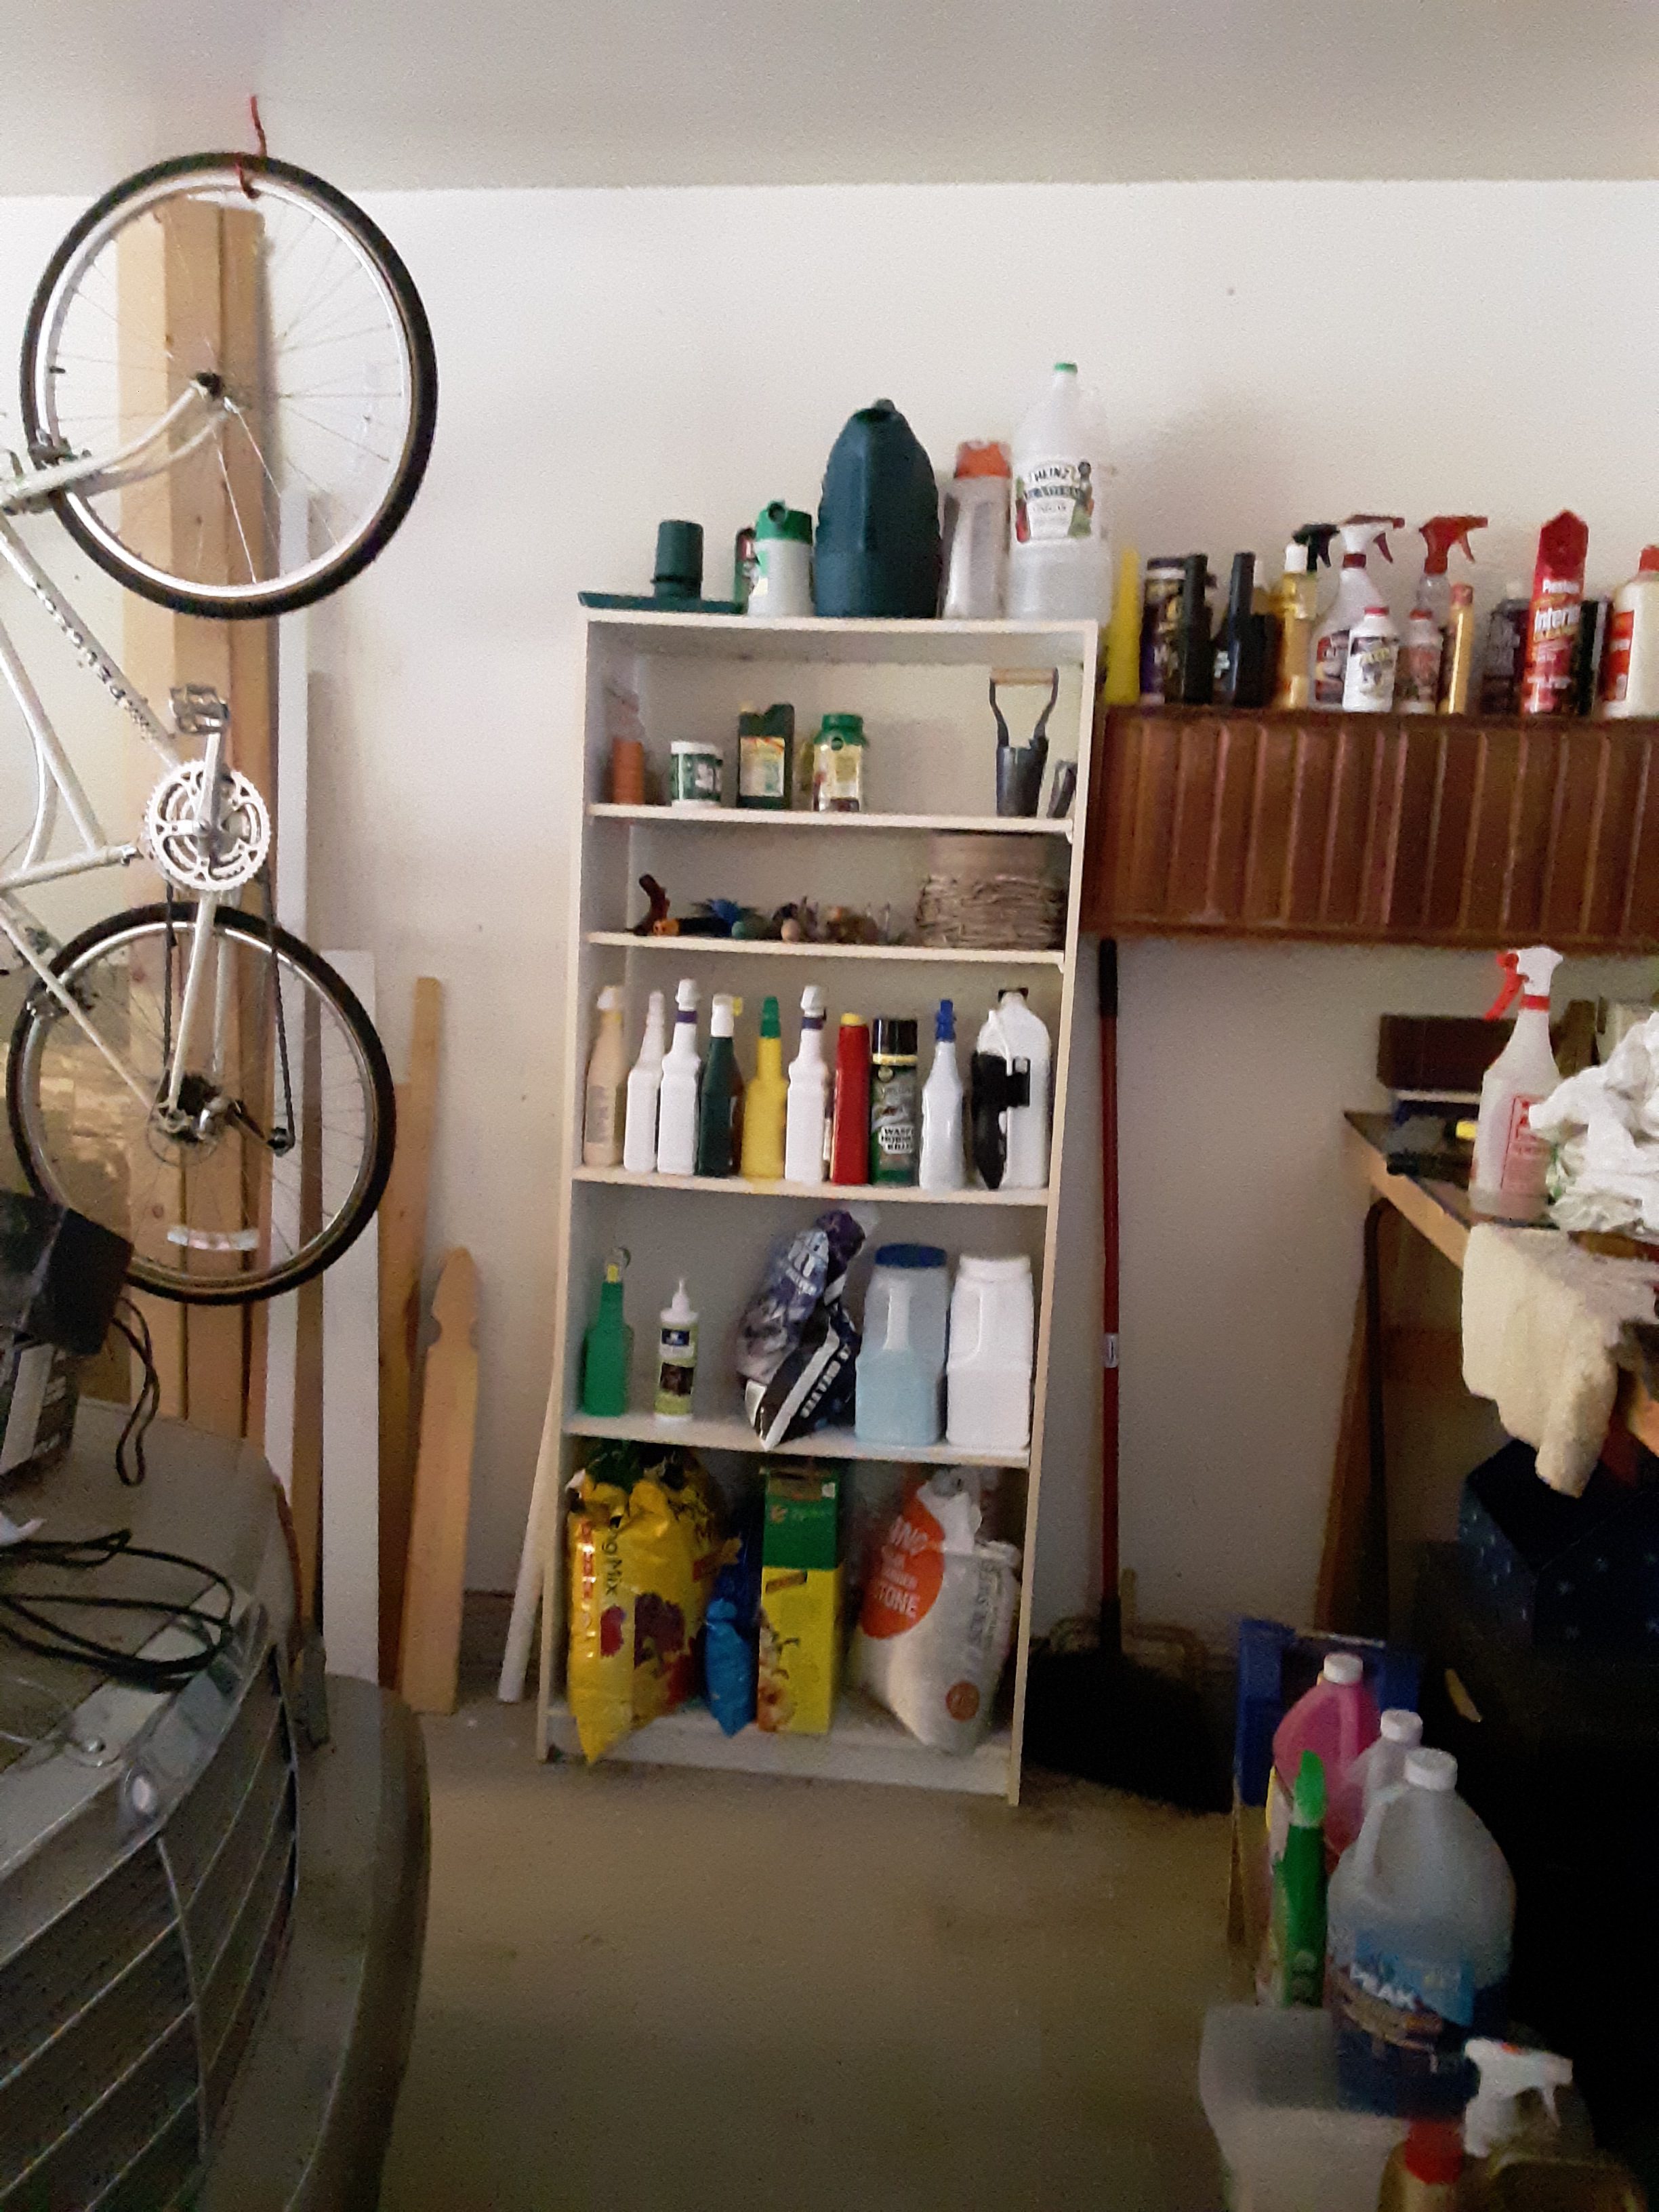 Garage shelves, now organized, holding gardening items, grass seed, tools